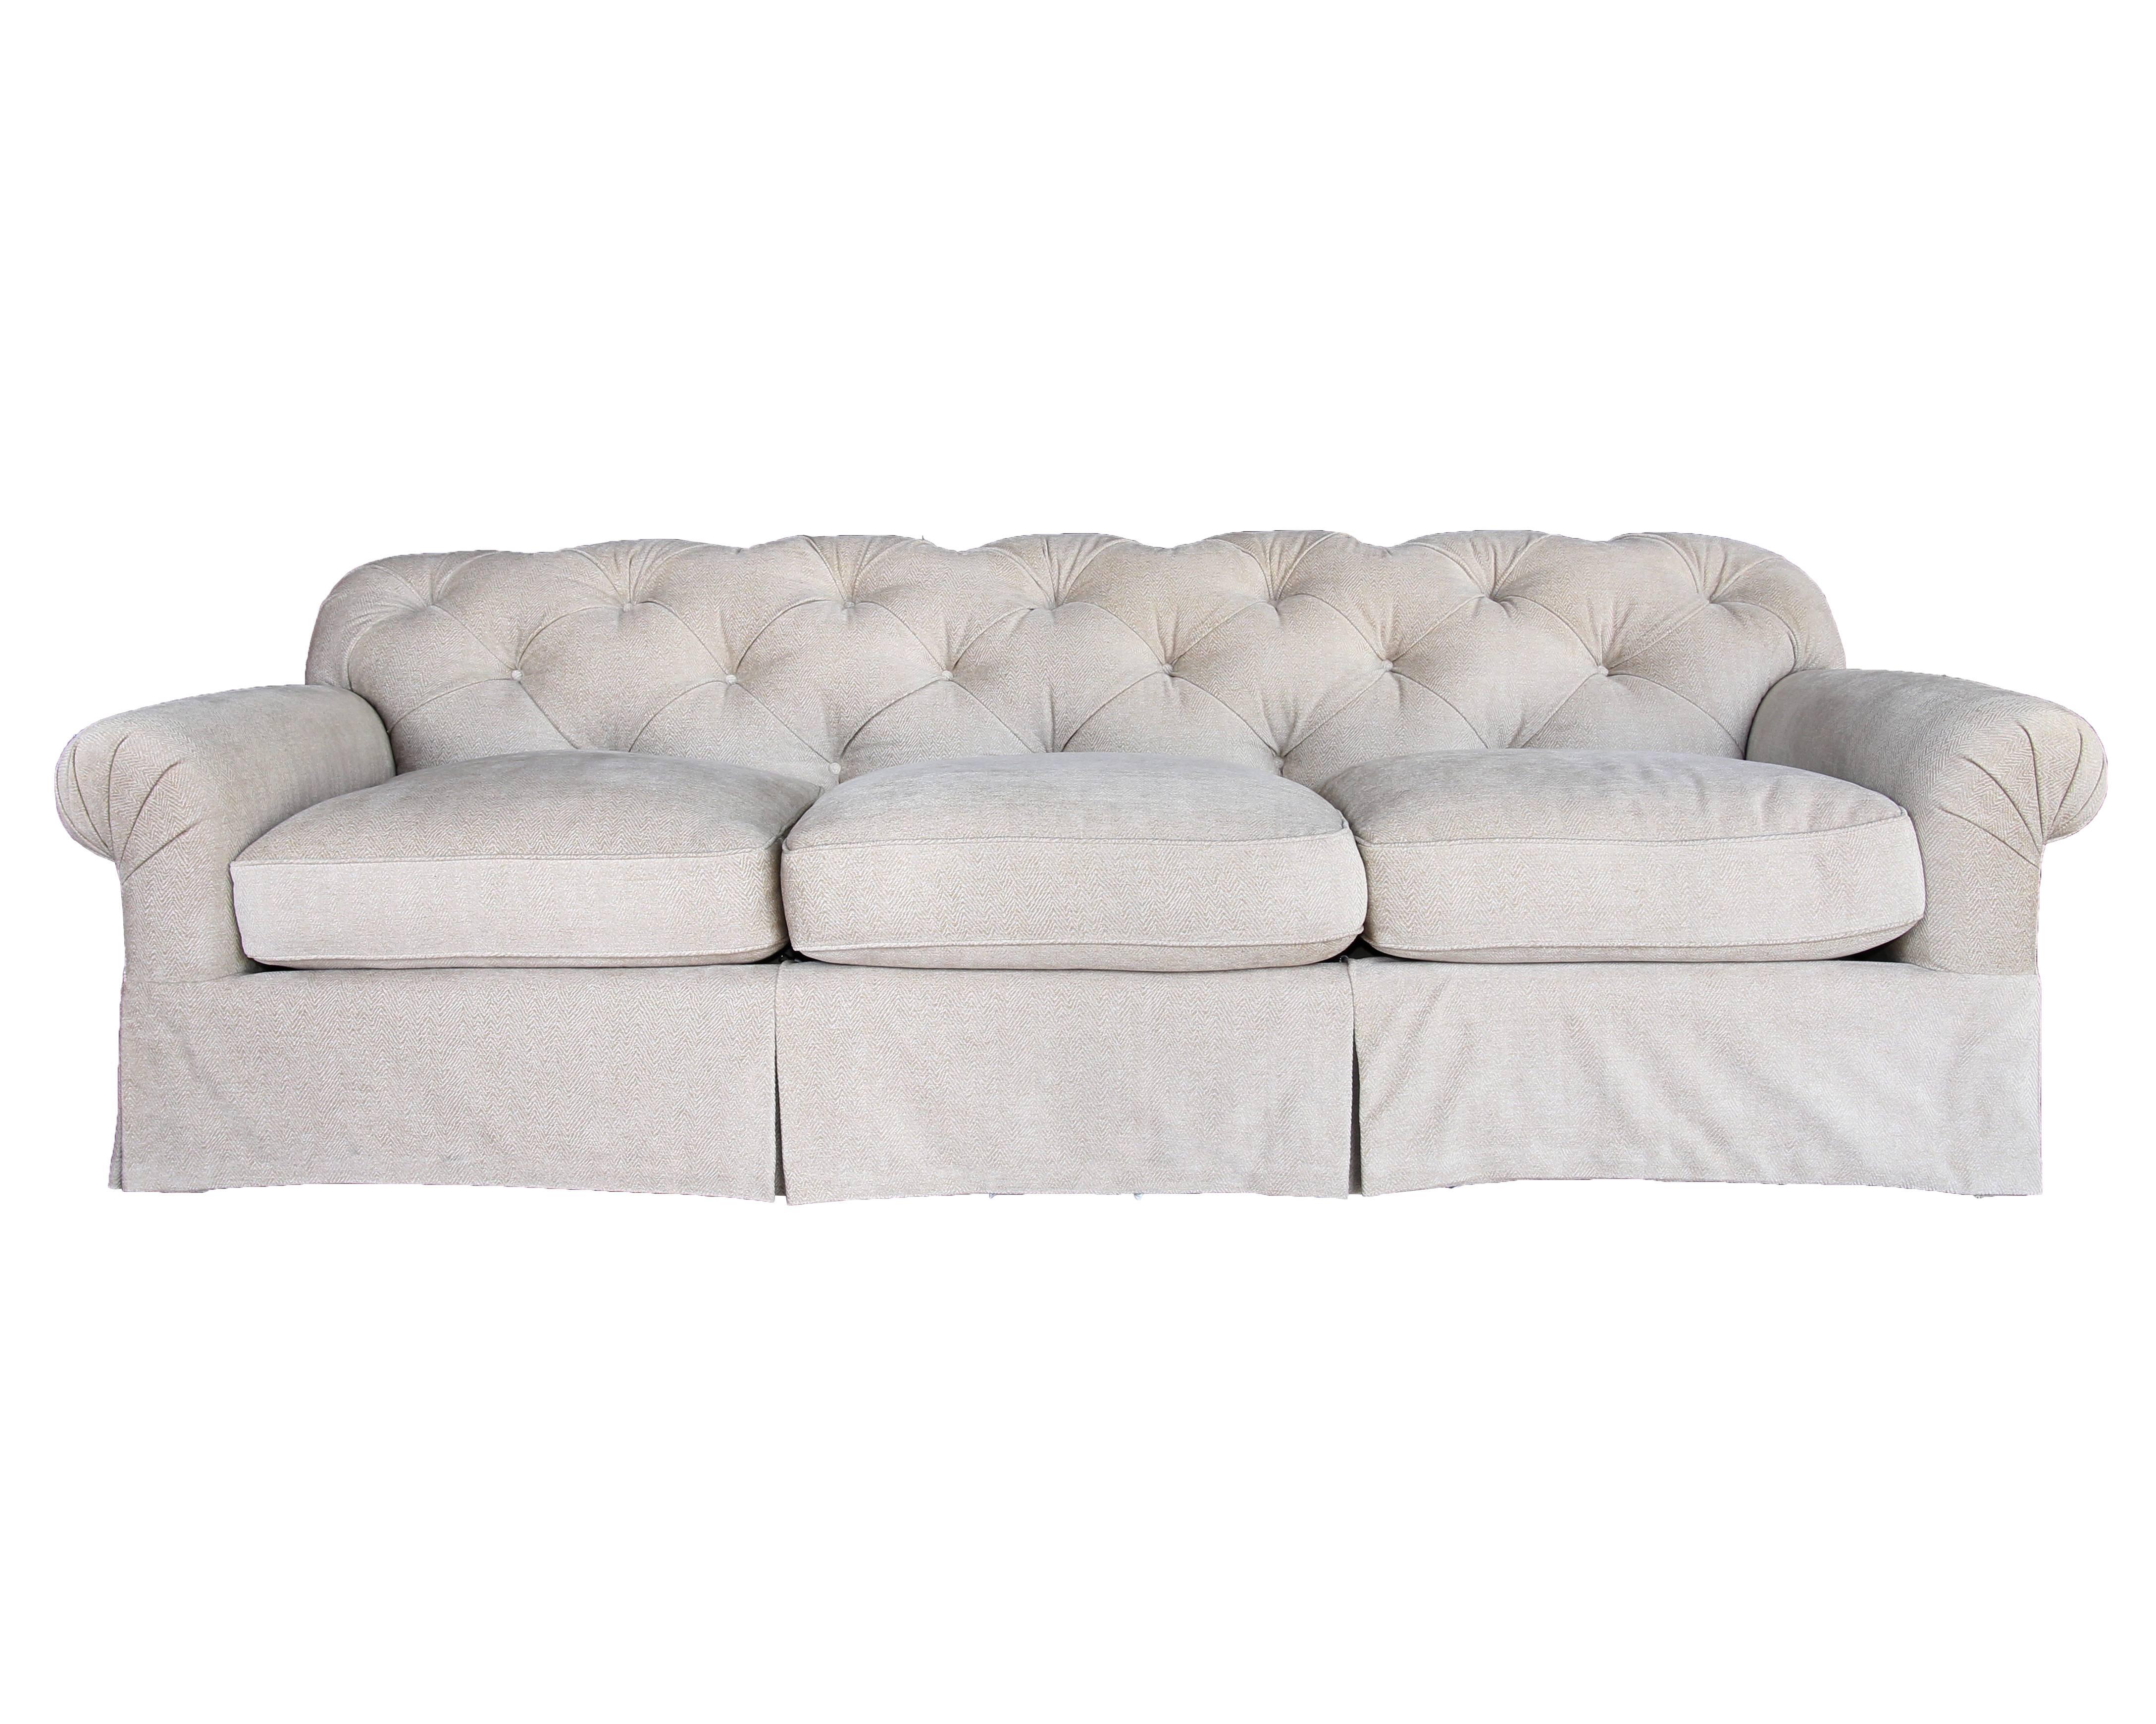 North American Tufted Chesterfield Style Sofa by Cameron Collection